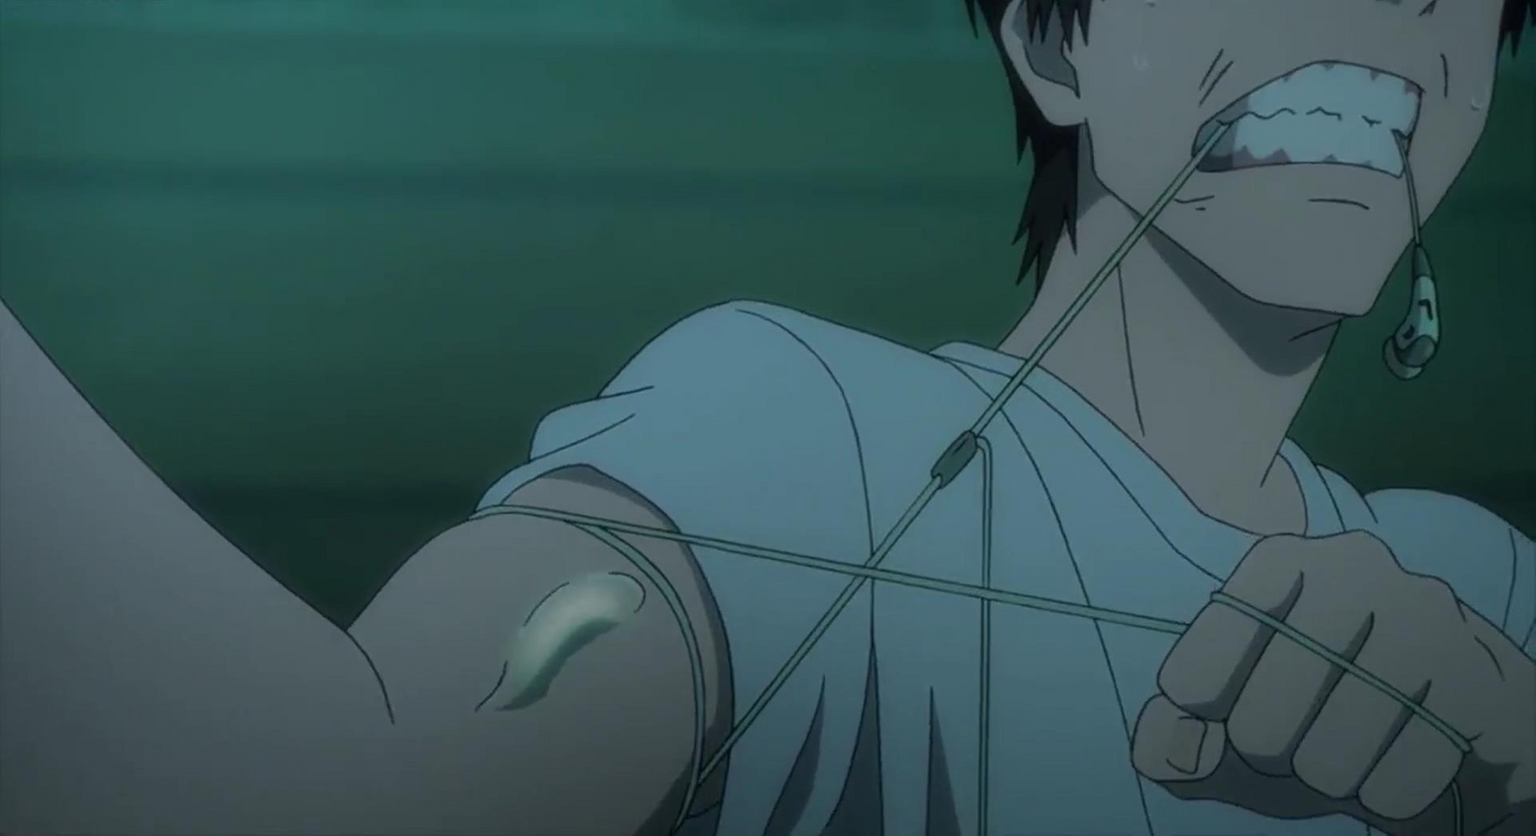 Will the anime, Parasyte, be continued? - Quora